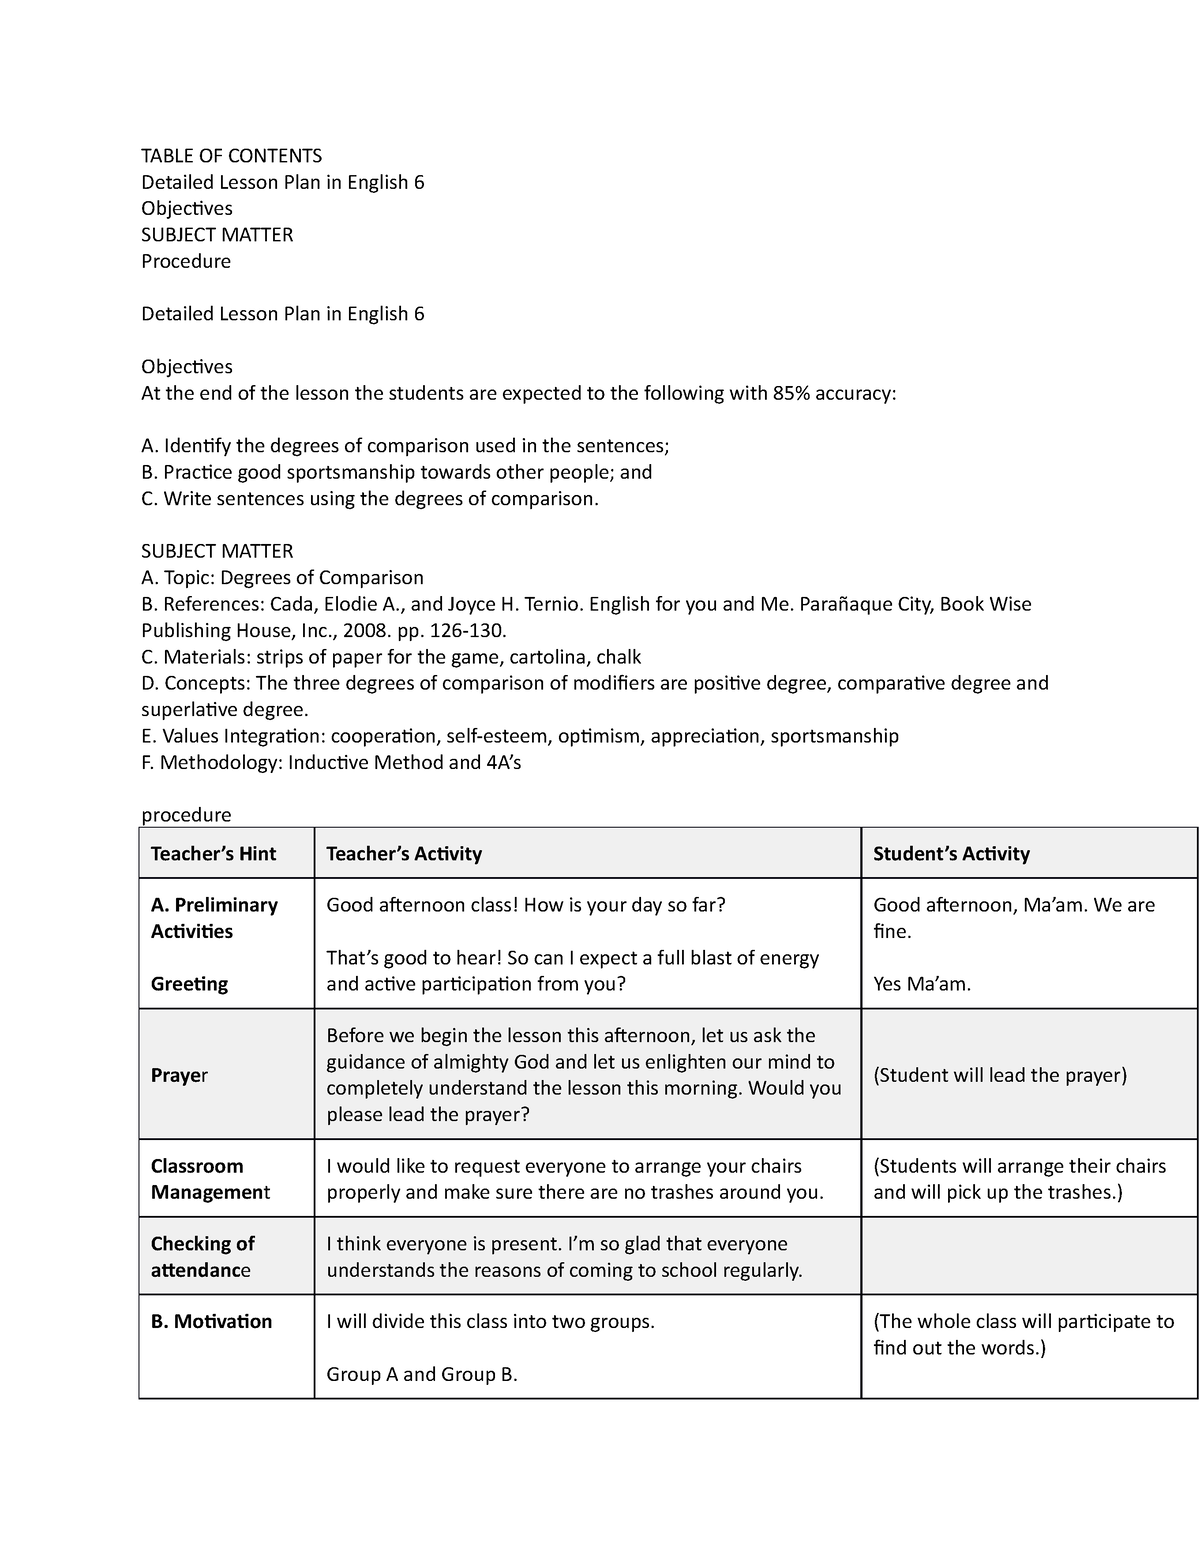 sample-lesson-plan-table-of-contentsdetailed-lesson-plan-in-english-6-objectivessubject-matter